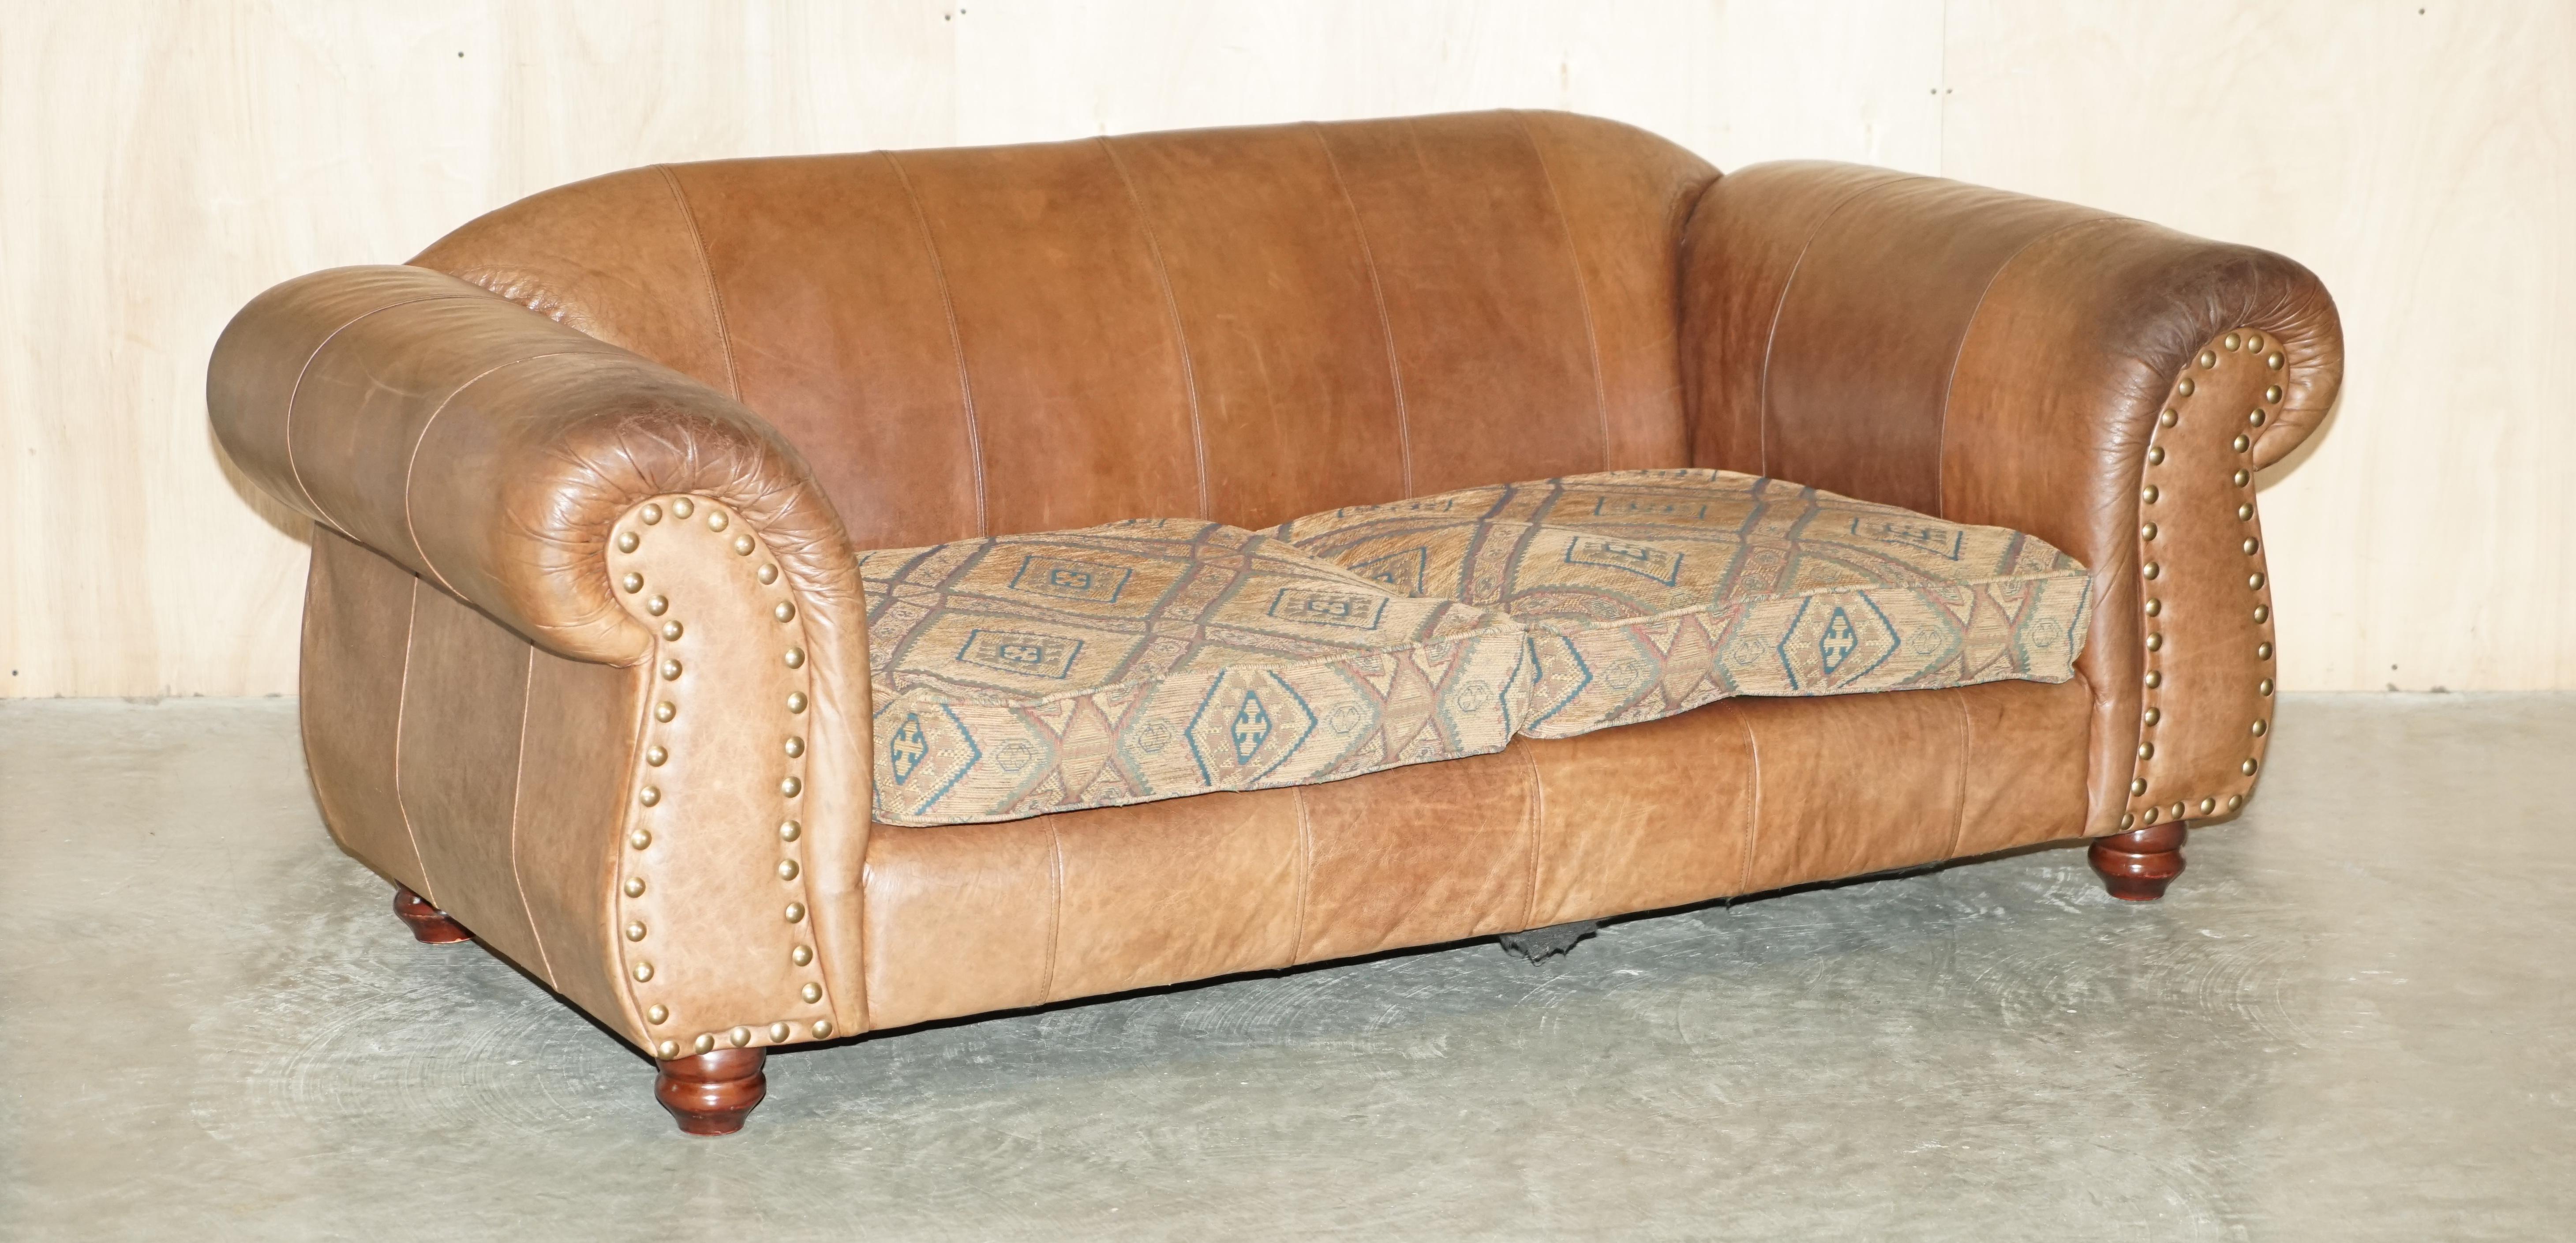 We are delighted to offer for sale this pair of large vintage Thomas Lloyd brown leather with Kilim seat cushion sofas from a rather spectacular Scottish castle 

A very good looking and super comfortable pair of large sofas, they come in heritage